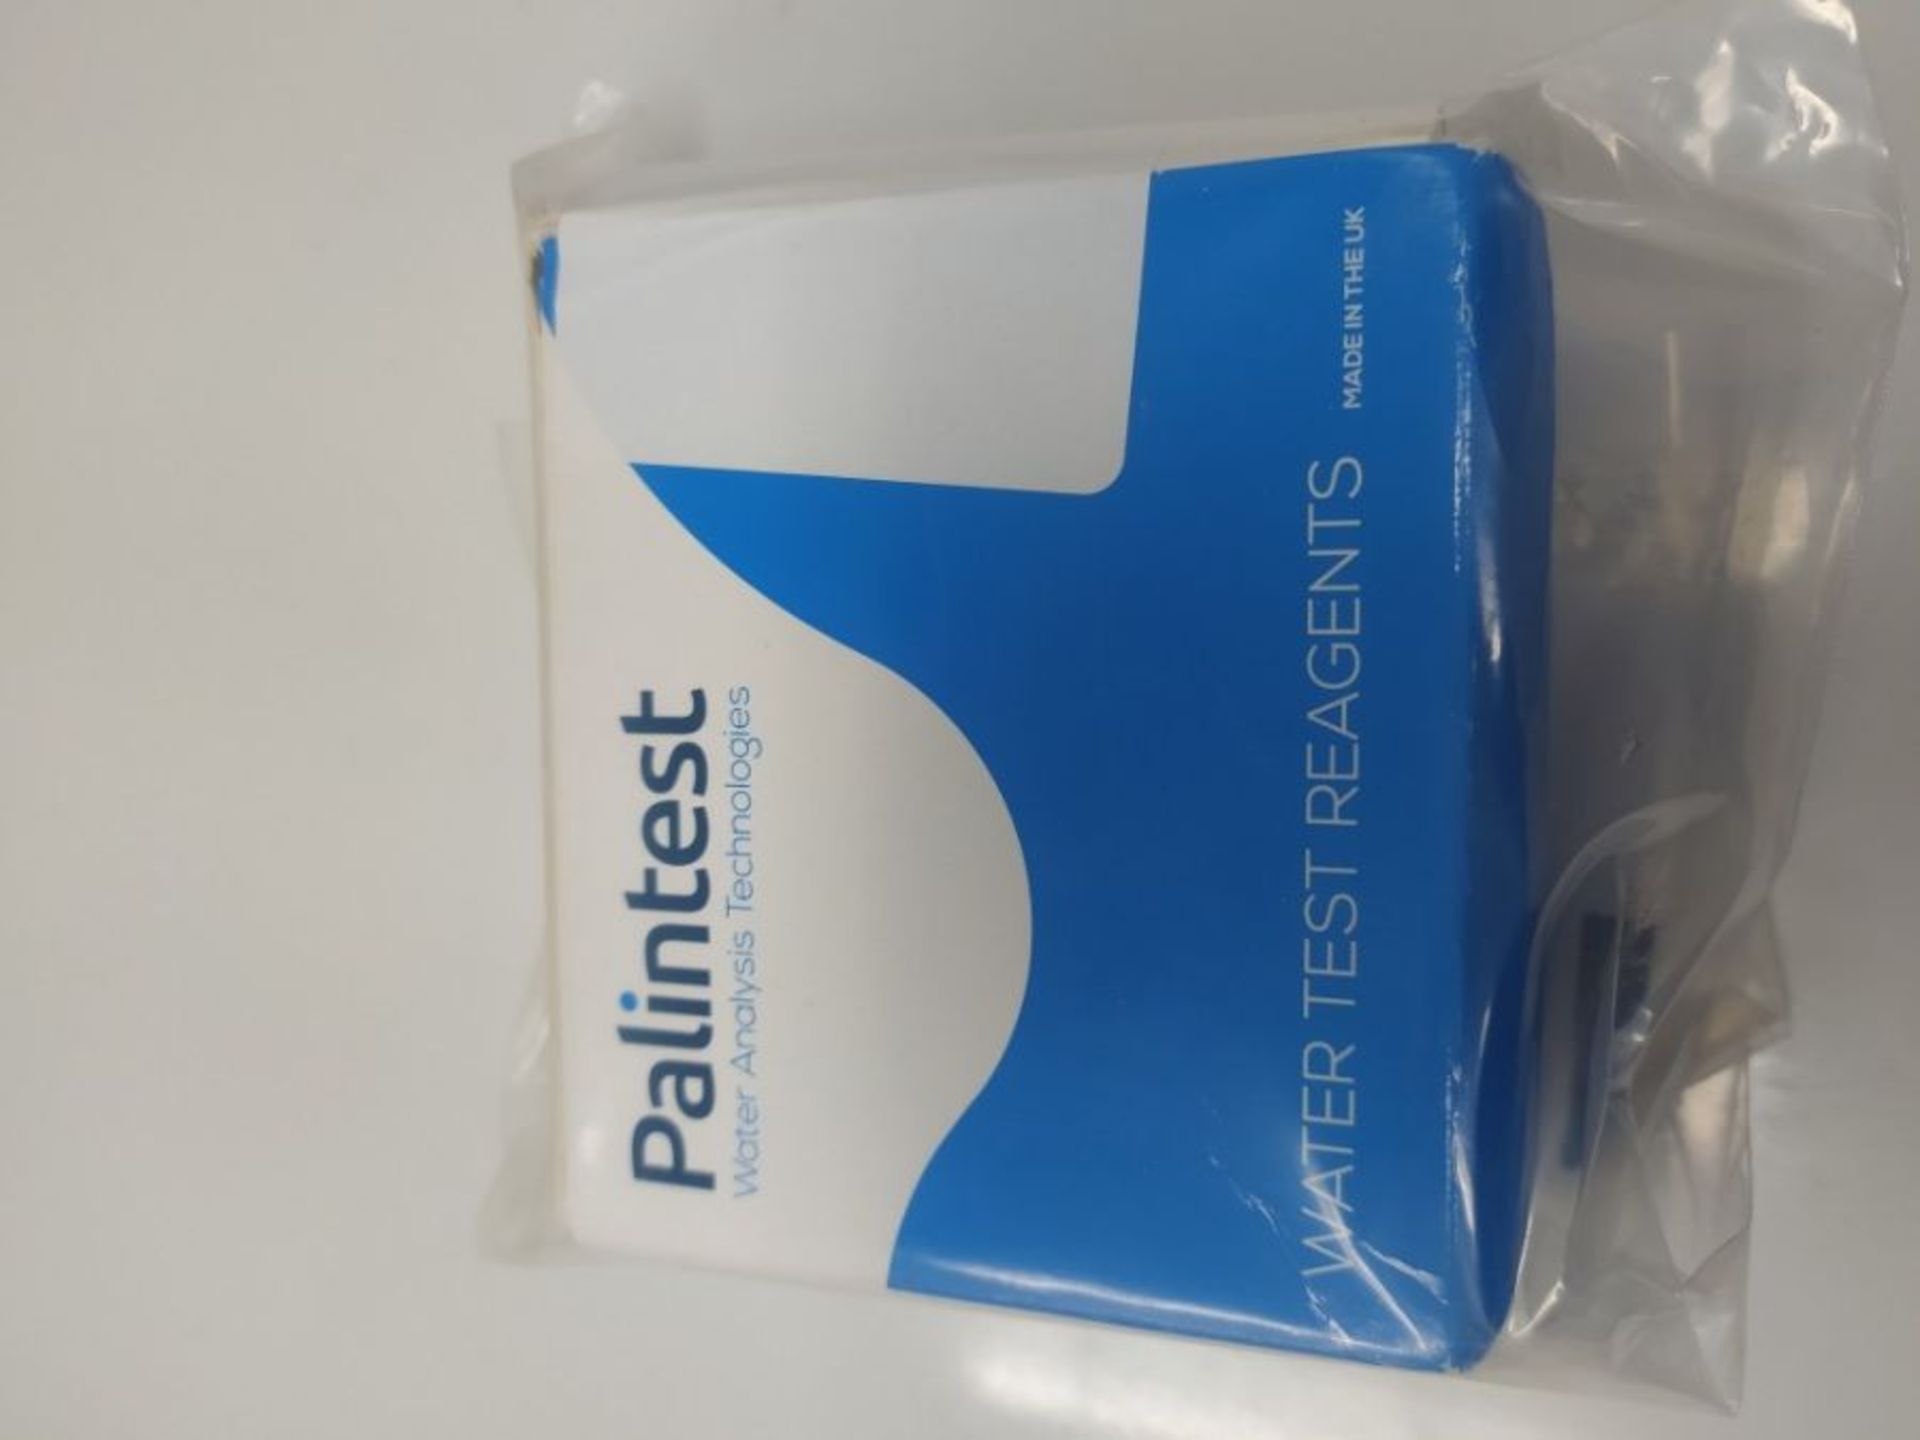 250 1 Rapid test tablets DPD (25 Strips) for pool testers Chlorine from Palintest/Swim - Image 2 of 2